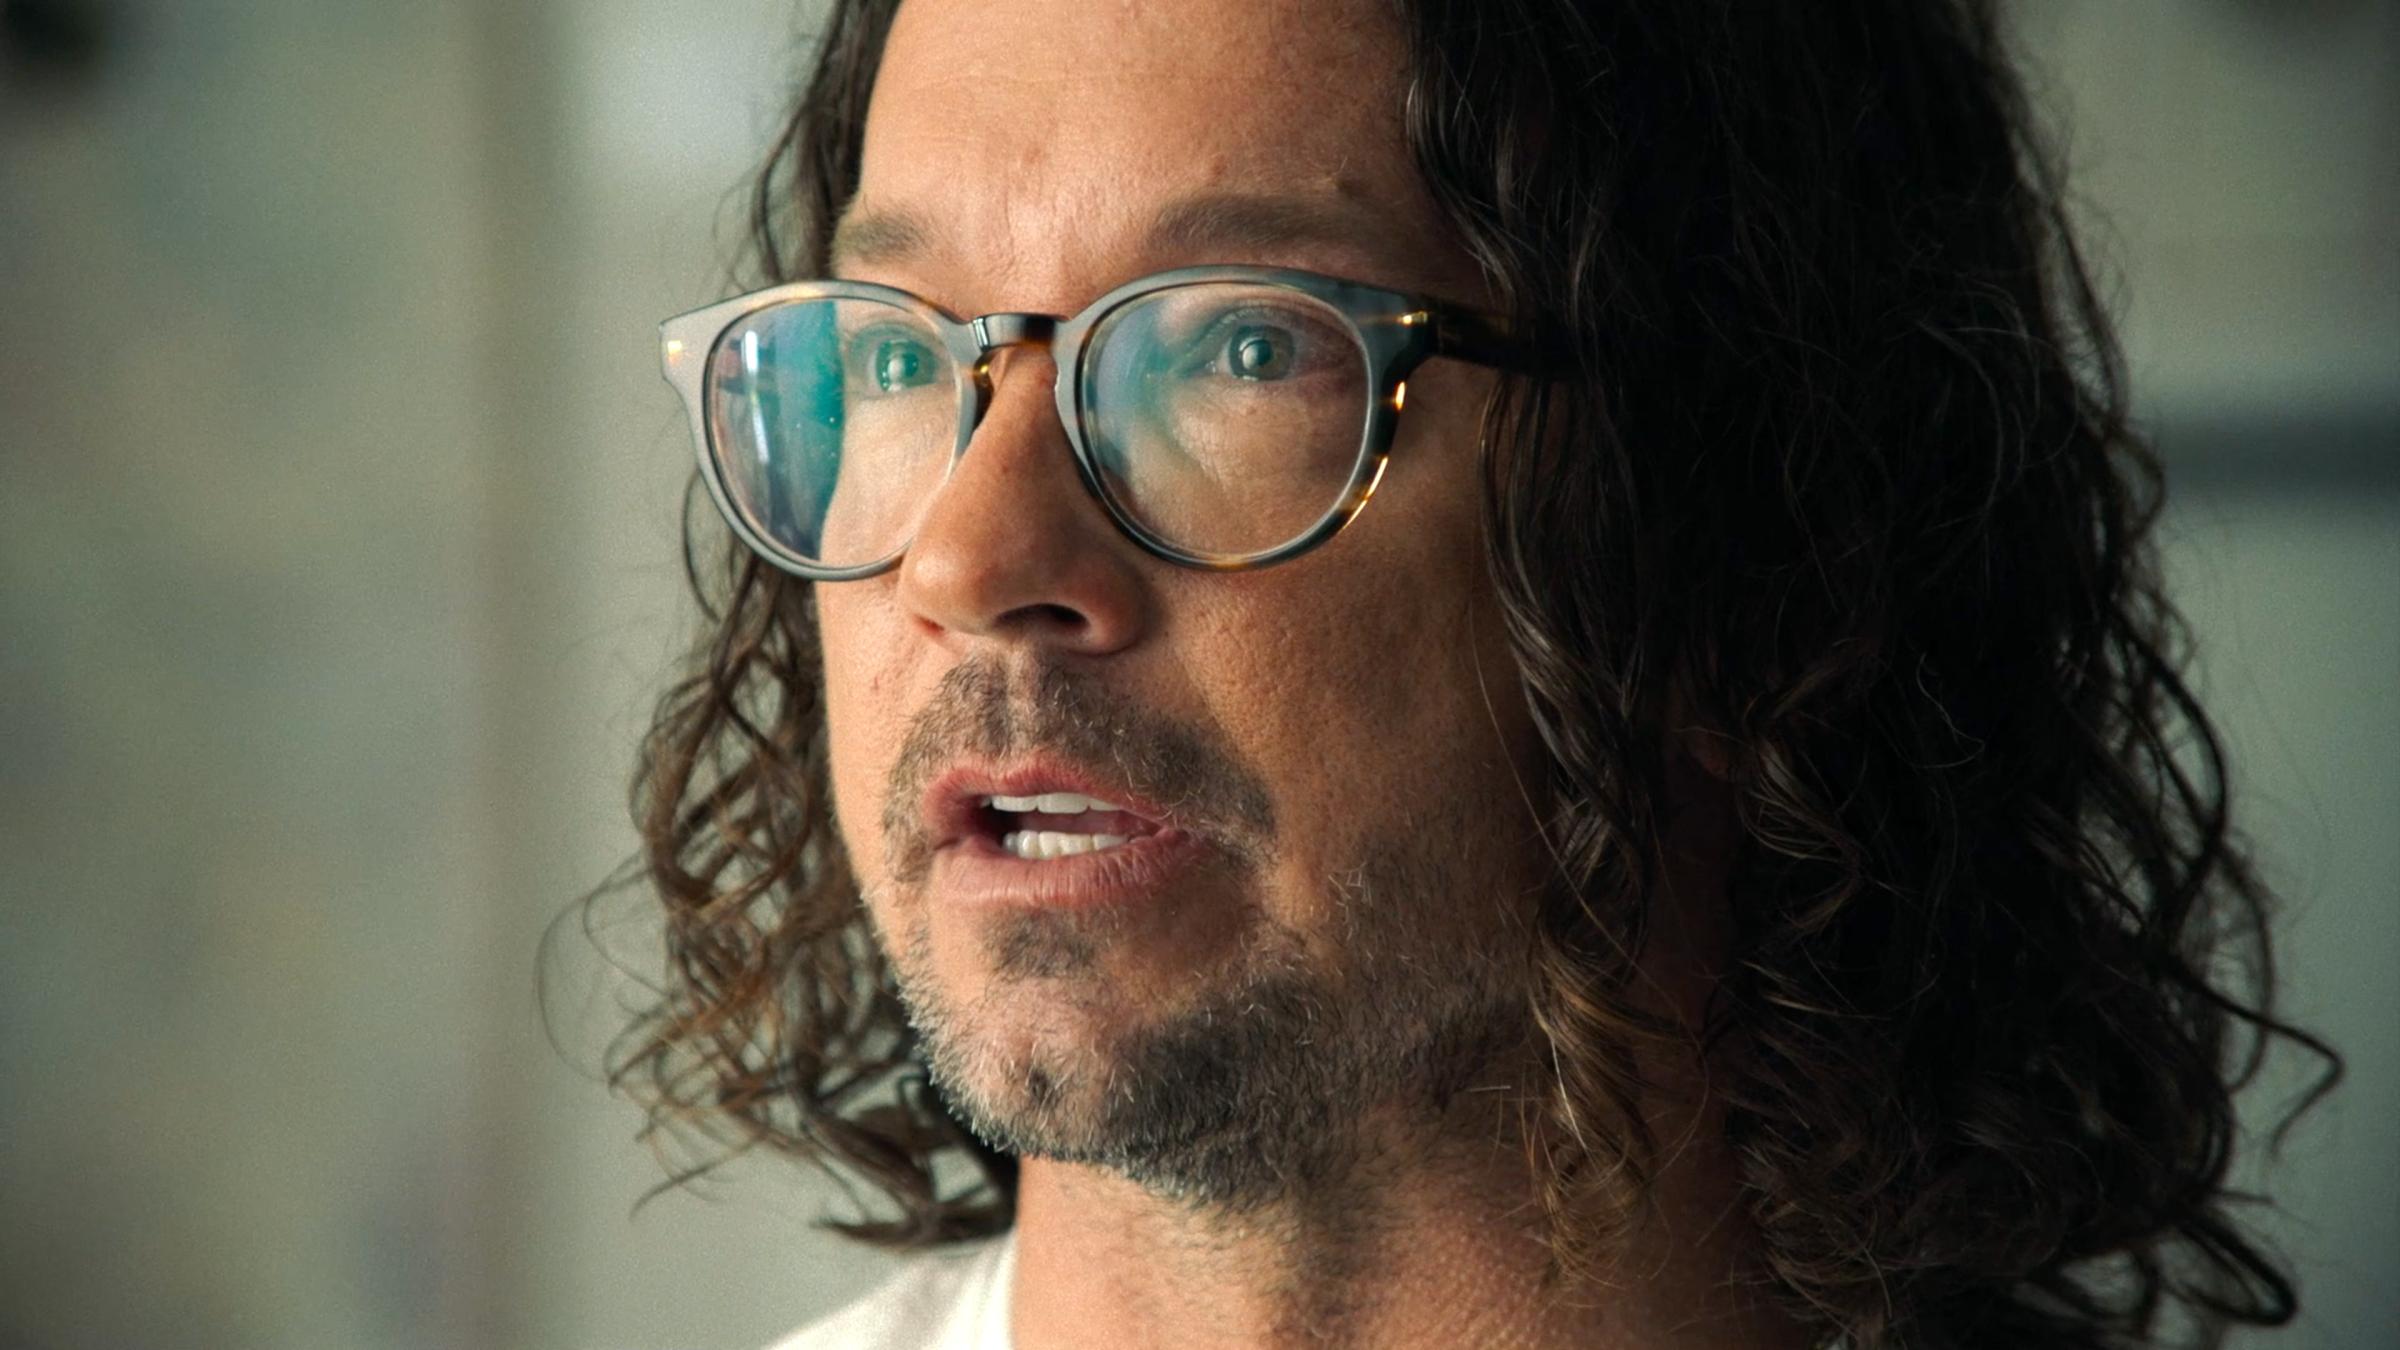 THE SECRETS OF HILLSONG “The Prodigal Son” — Season 1, Episode 2 (airs Friday, May 19th) — Pictured: Carl Lentz. CR: FX.